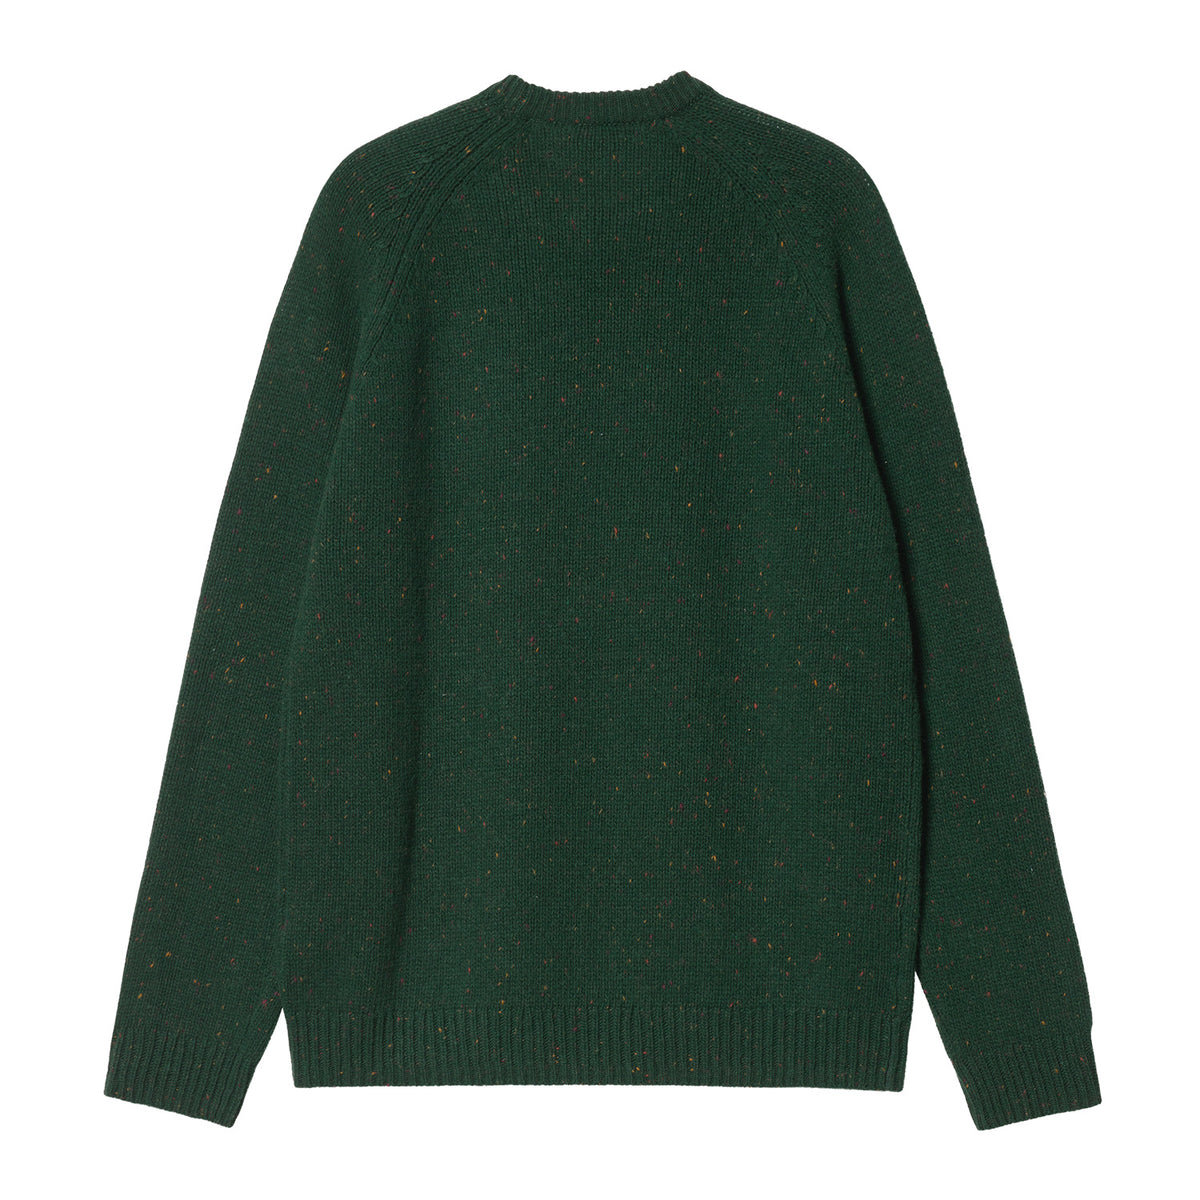 Carhartt Angelistic Sweater - Speckled Grove